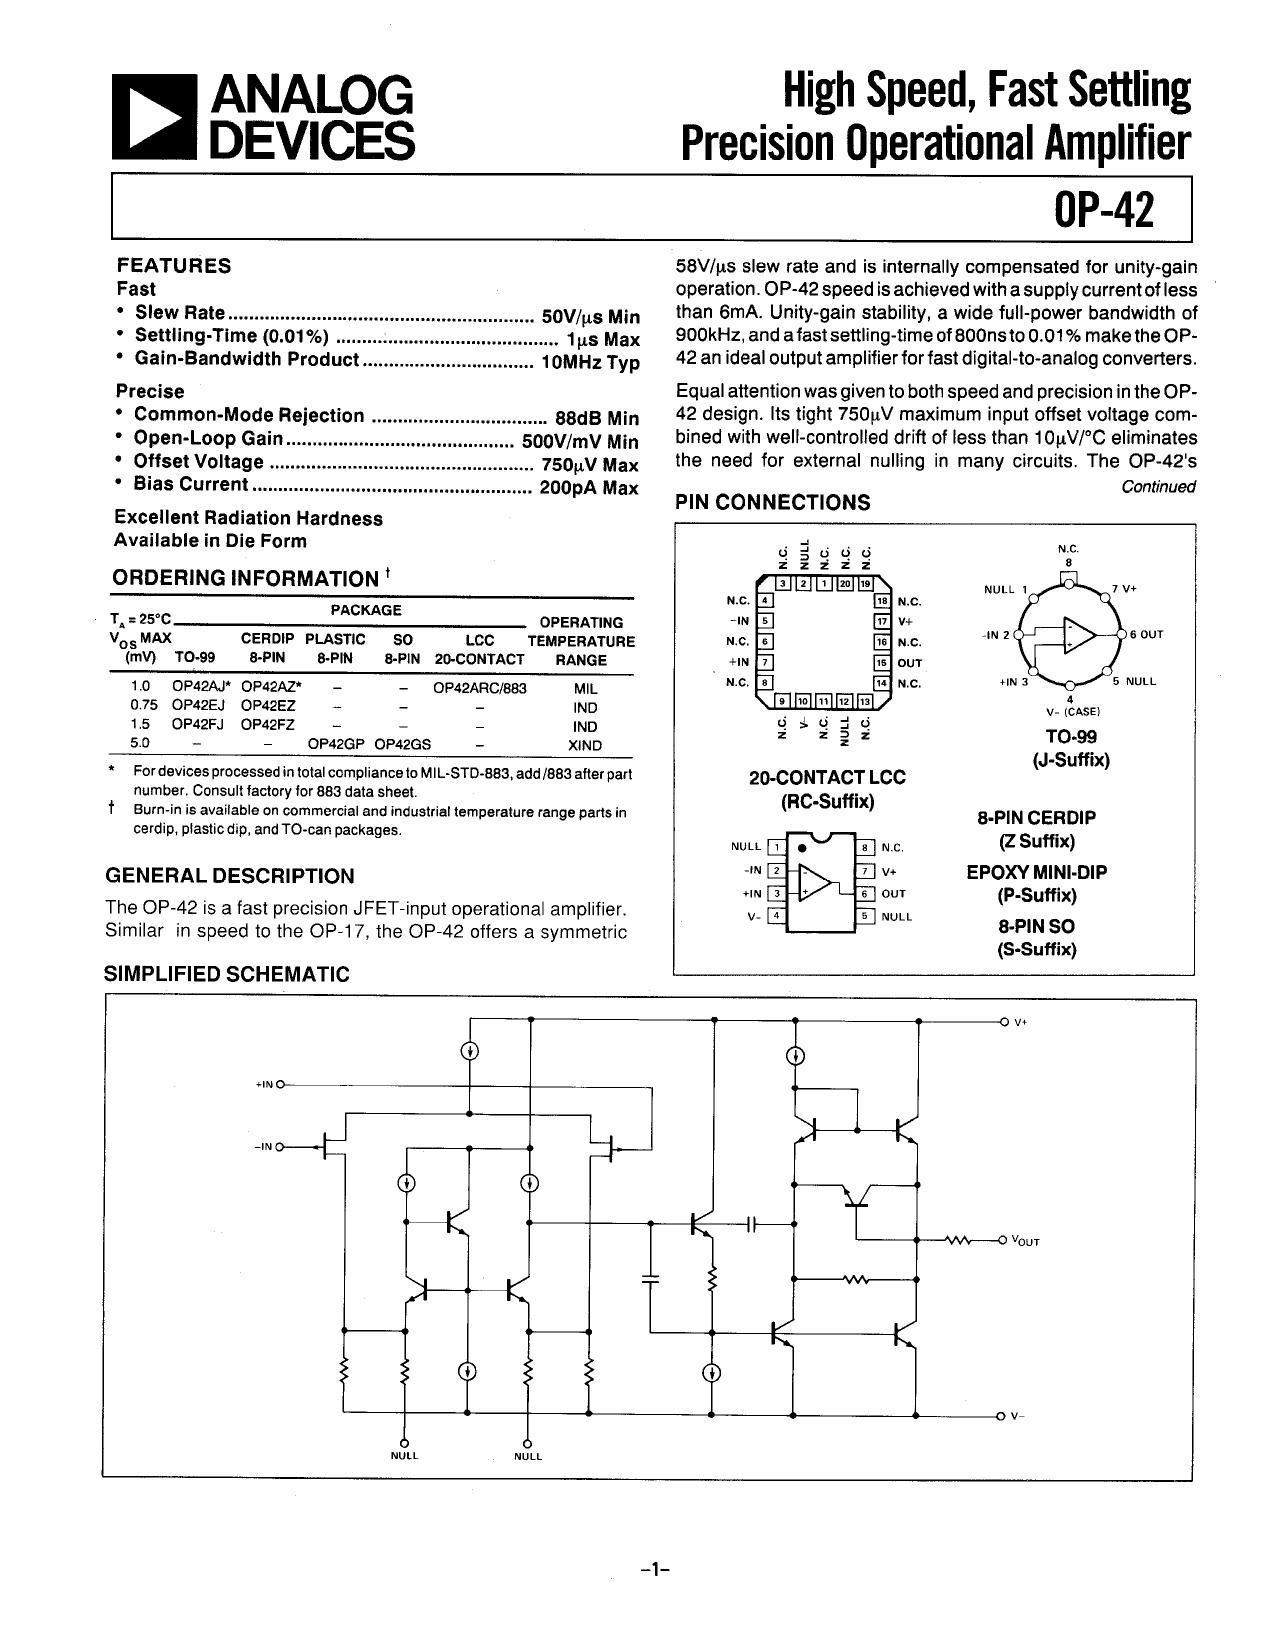 high-speed-fast-settling-precision-operational-amplifier-op-42.pdf